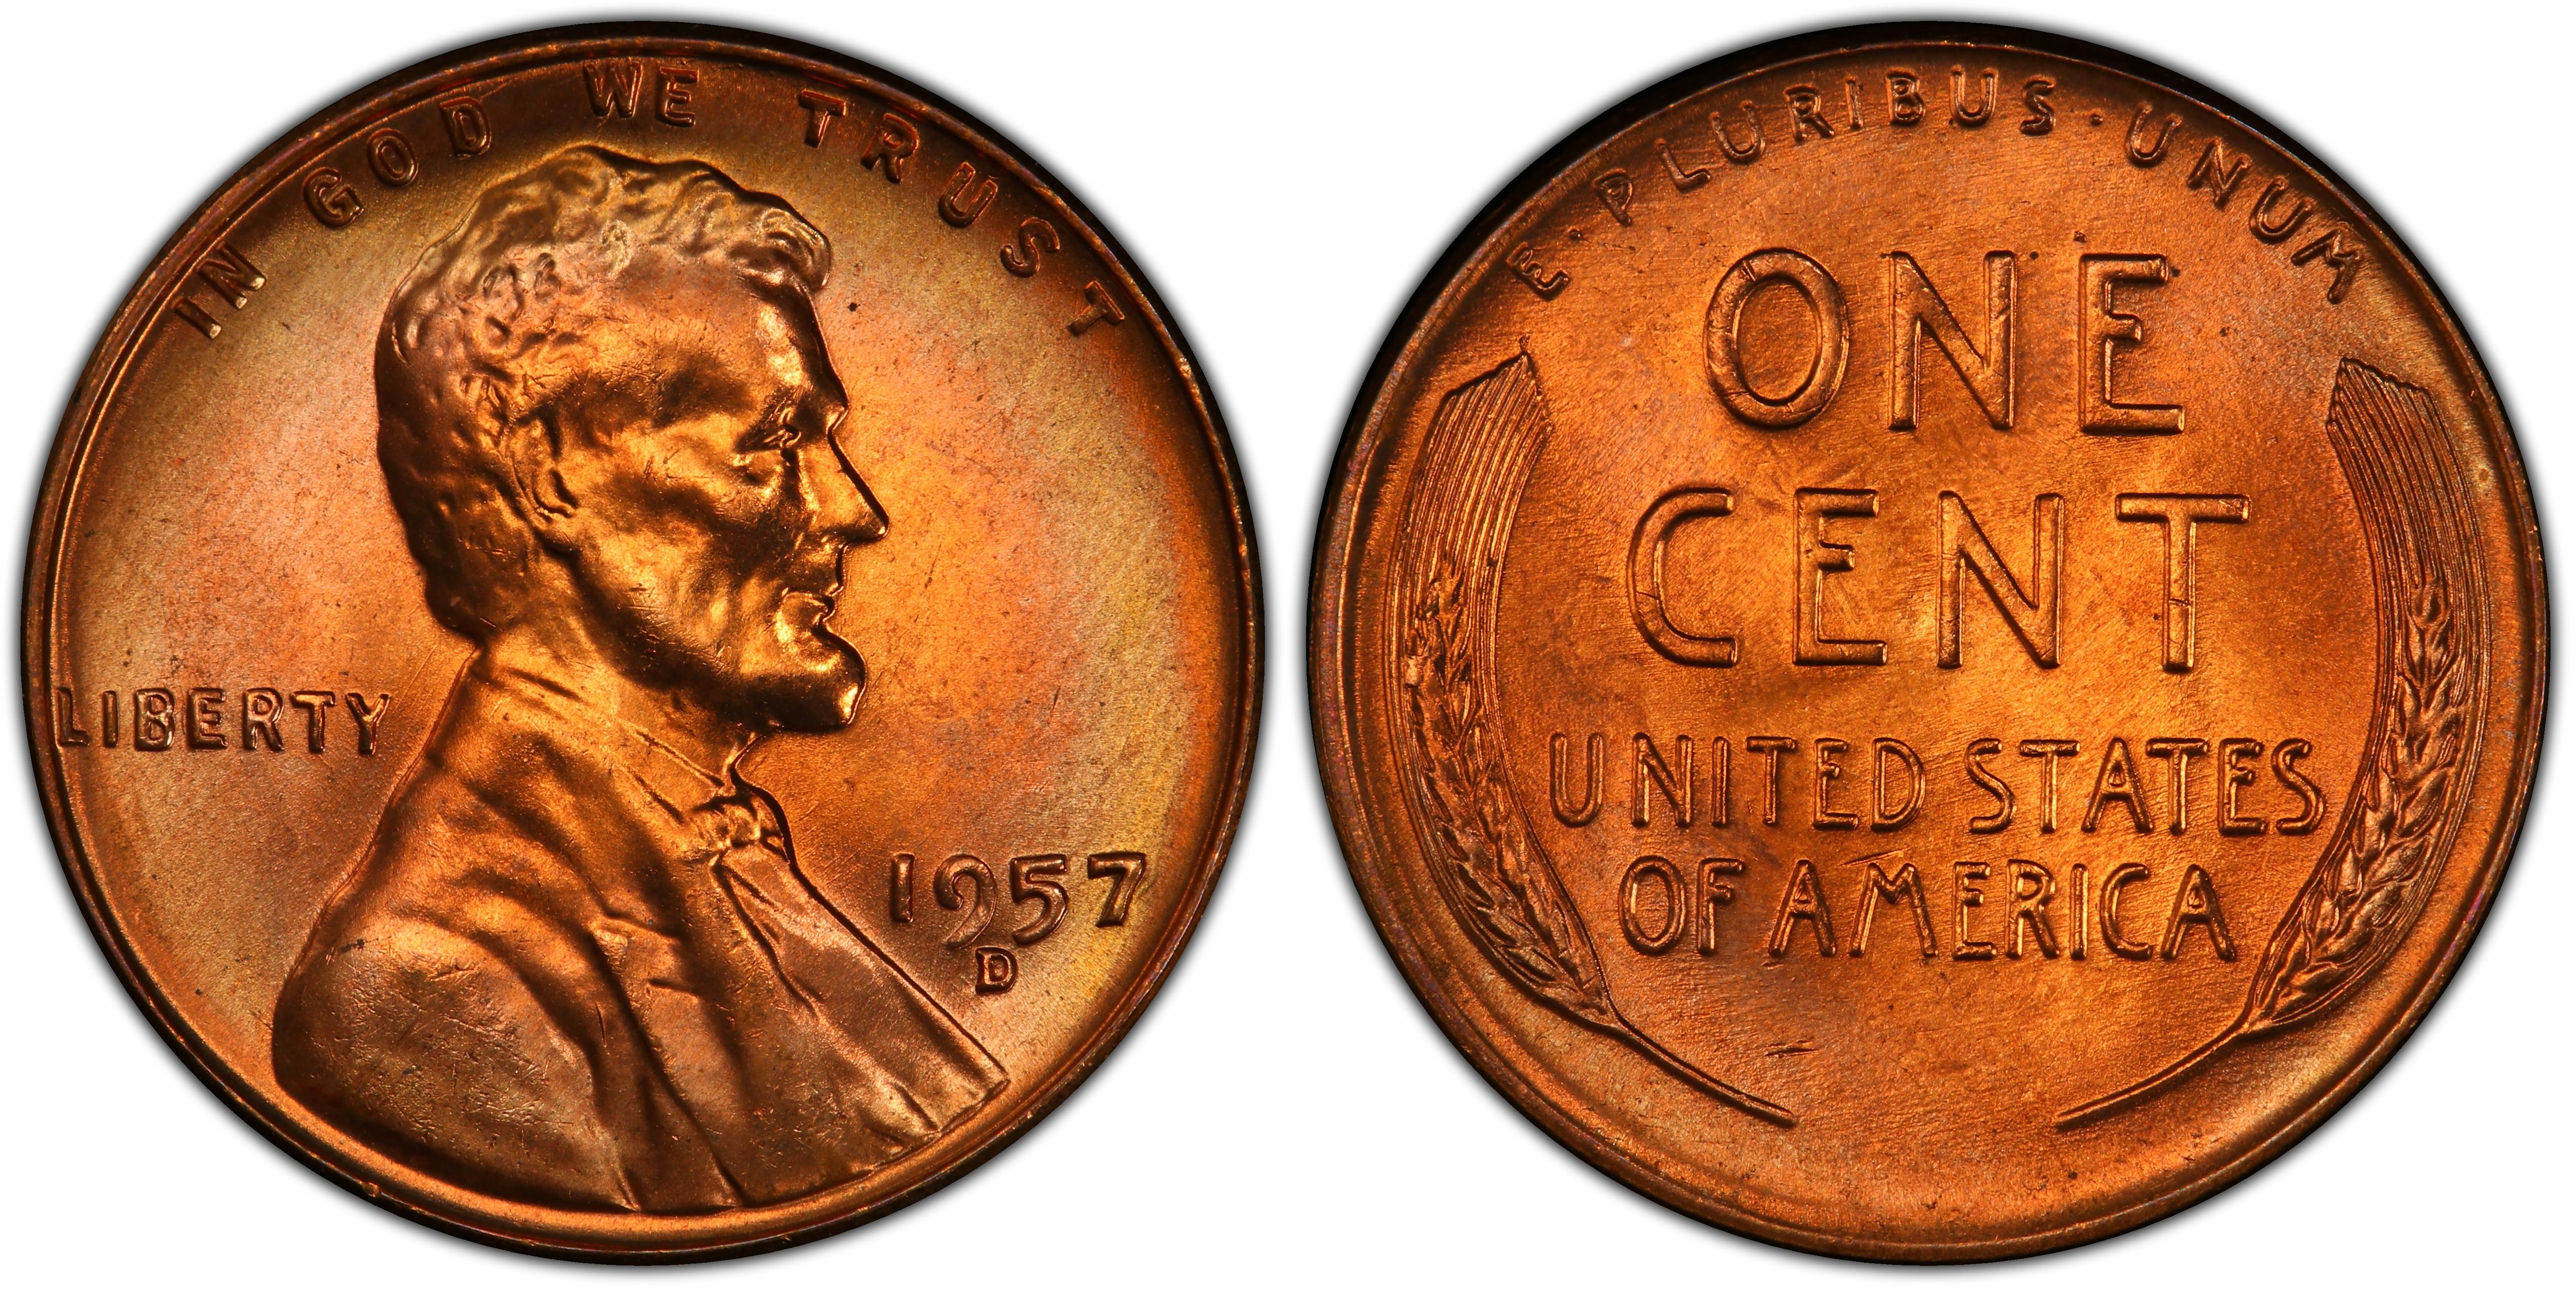 Details about   1957 D BU/UNC ROLL LINCOLN WHEAT CENTS SEALED ORIGINAL 1-OWNER COLLECTION ROLLS 